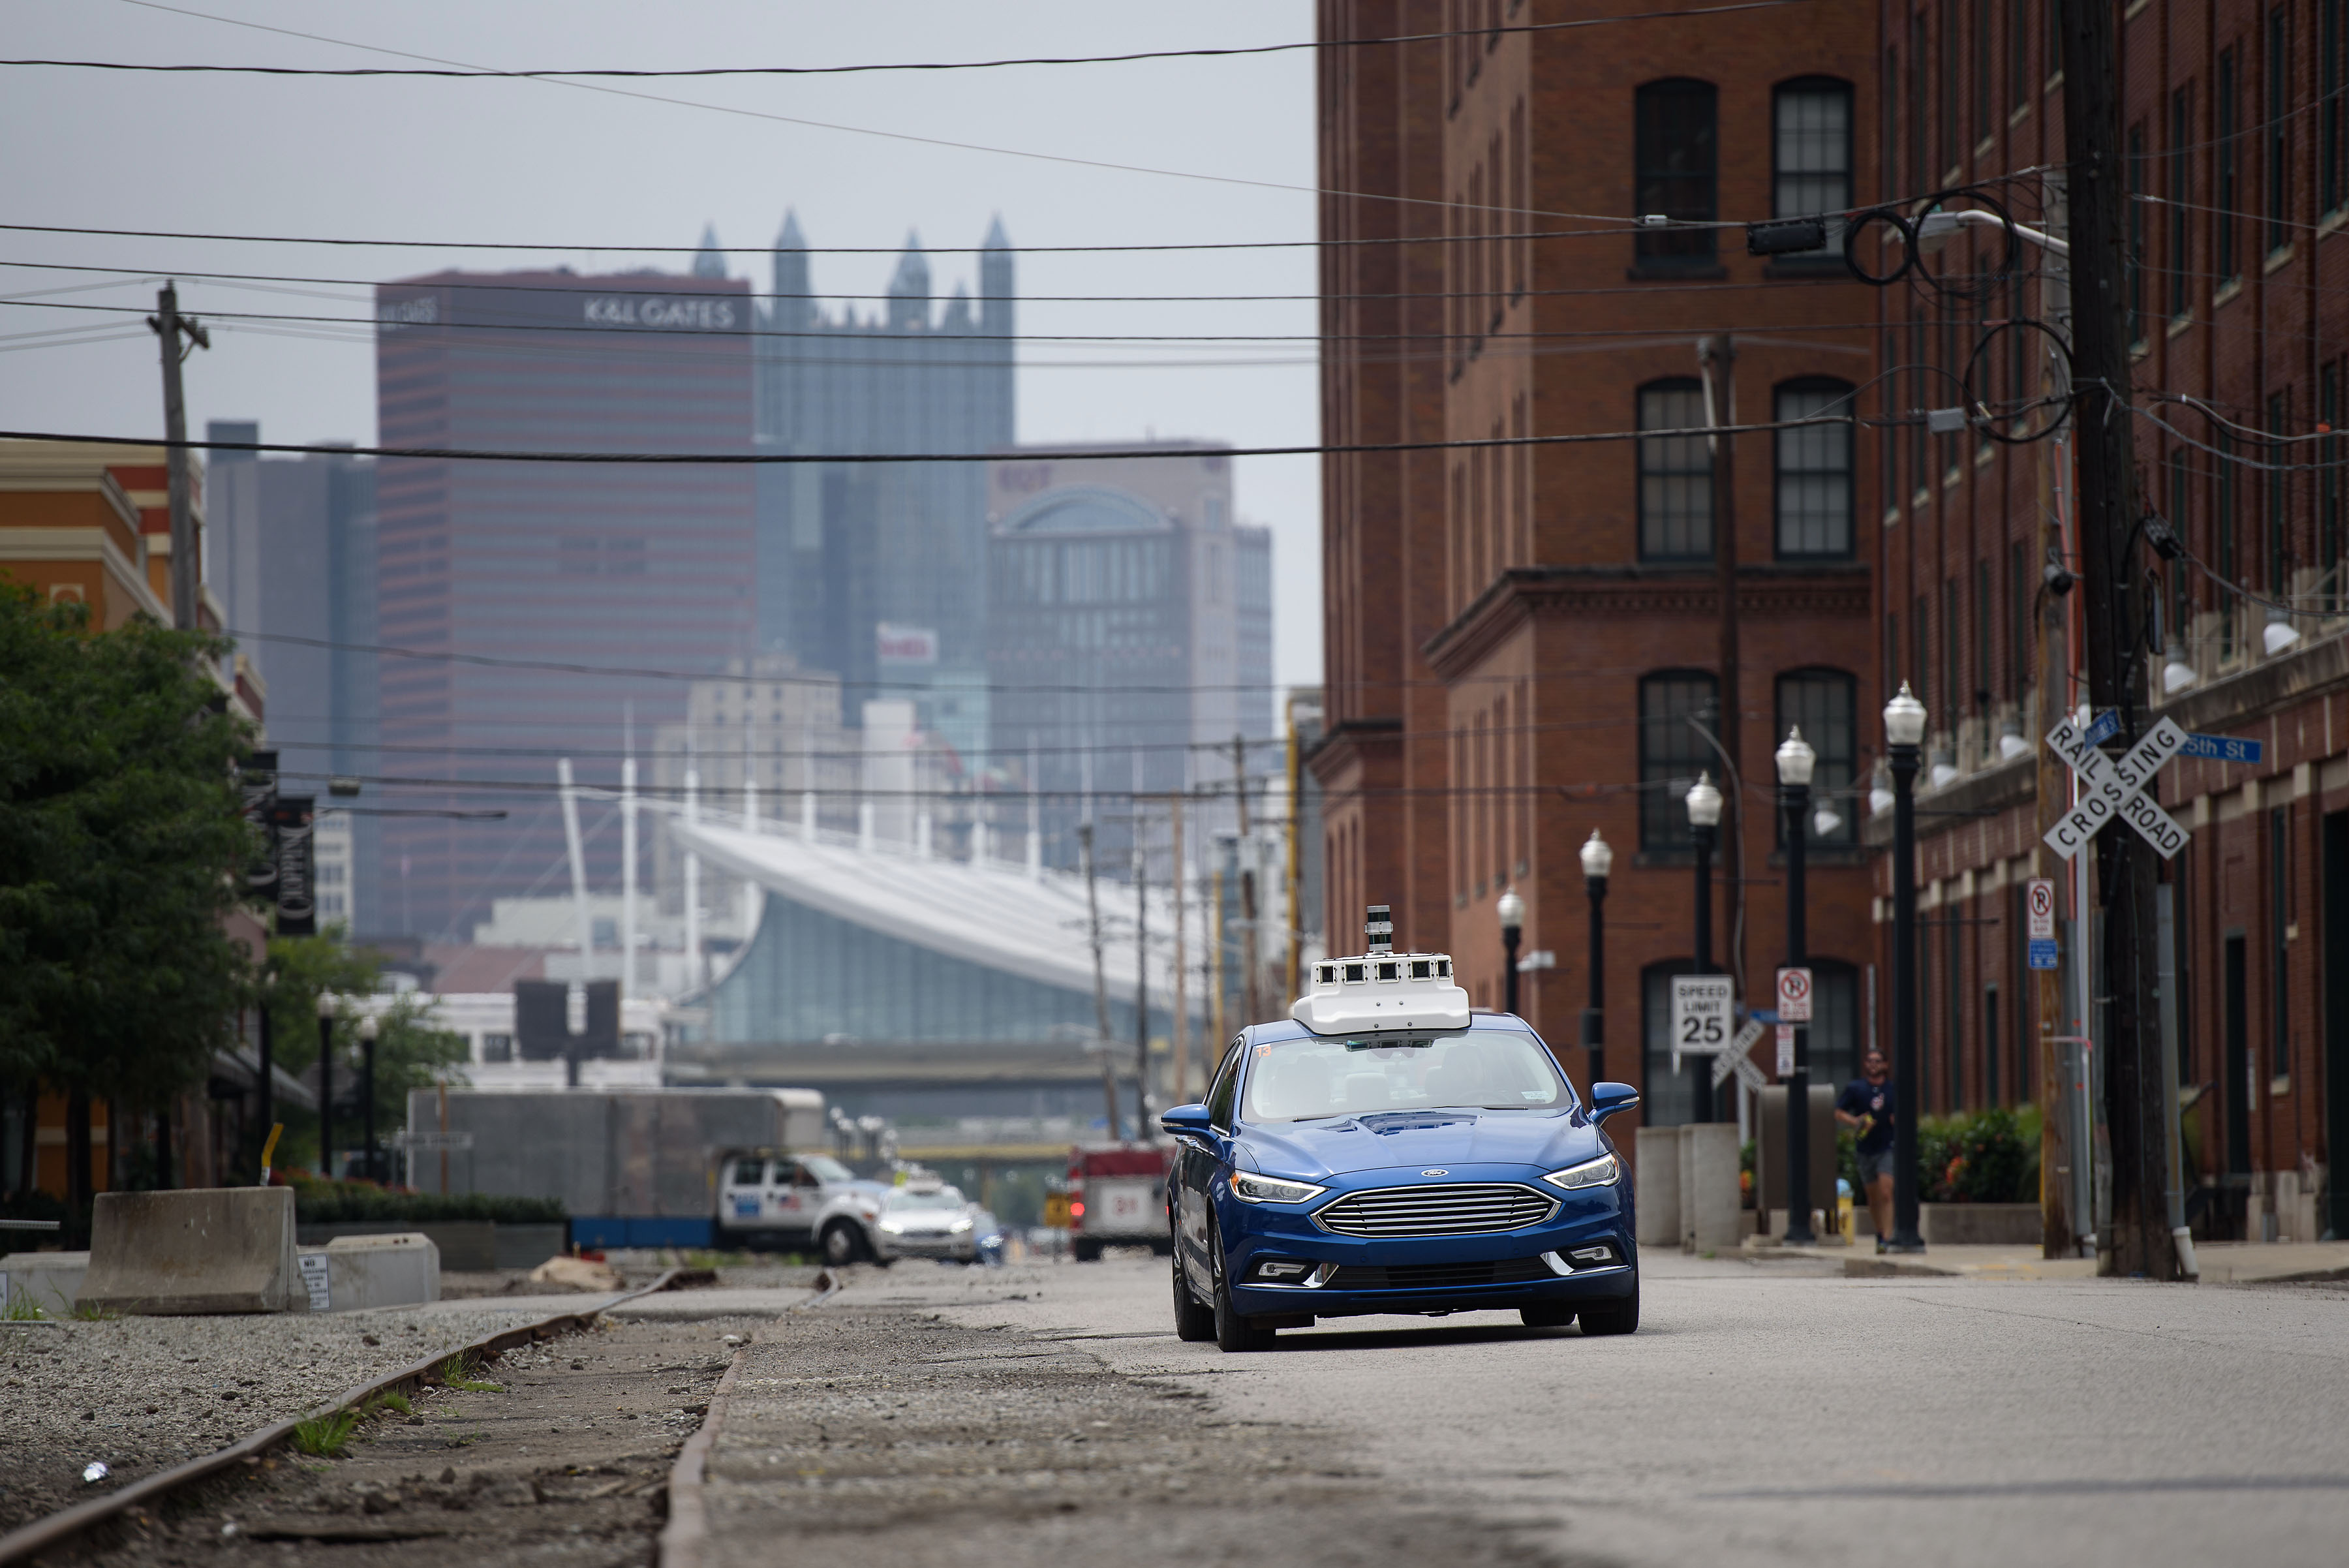 Uber's First Self-Driving Fleet Arrives in Pittsburgh This Month - Bloomberg